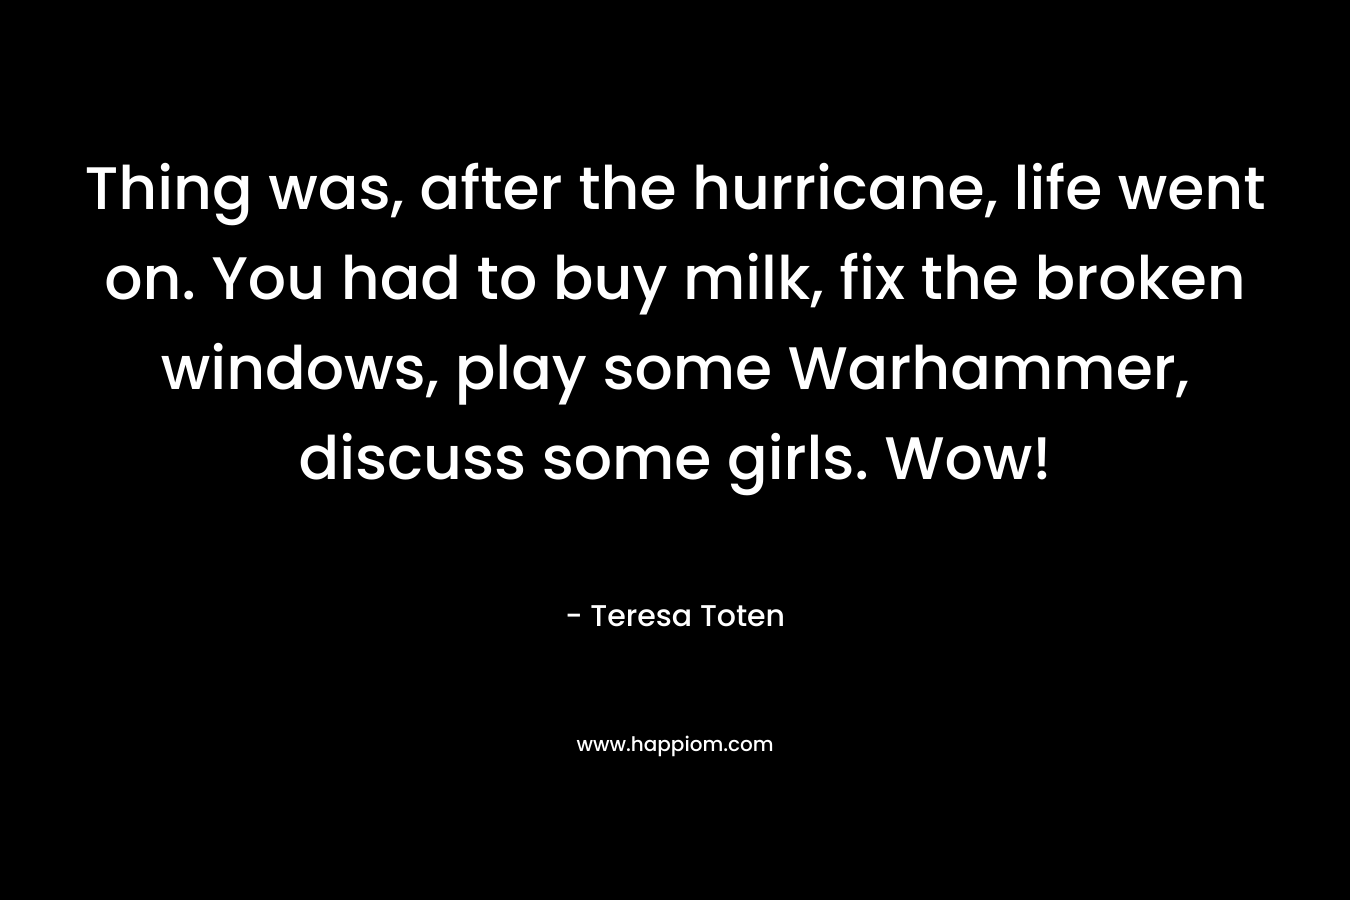 Thing was, after the hurricane, life went on. You had to buy milk, fix the broken windows, play some Warhammer, discuss some girls. Wow! – Teresa Toten